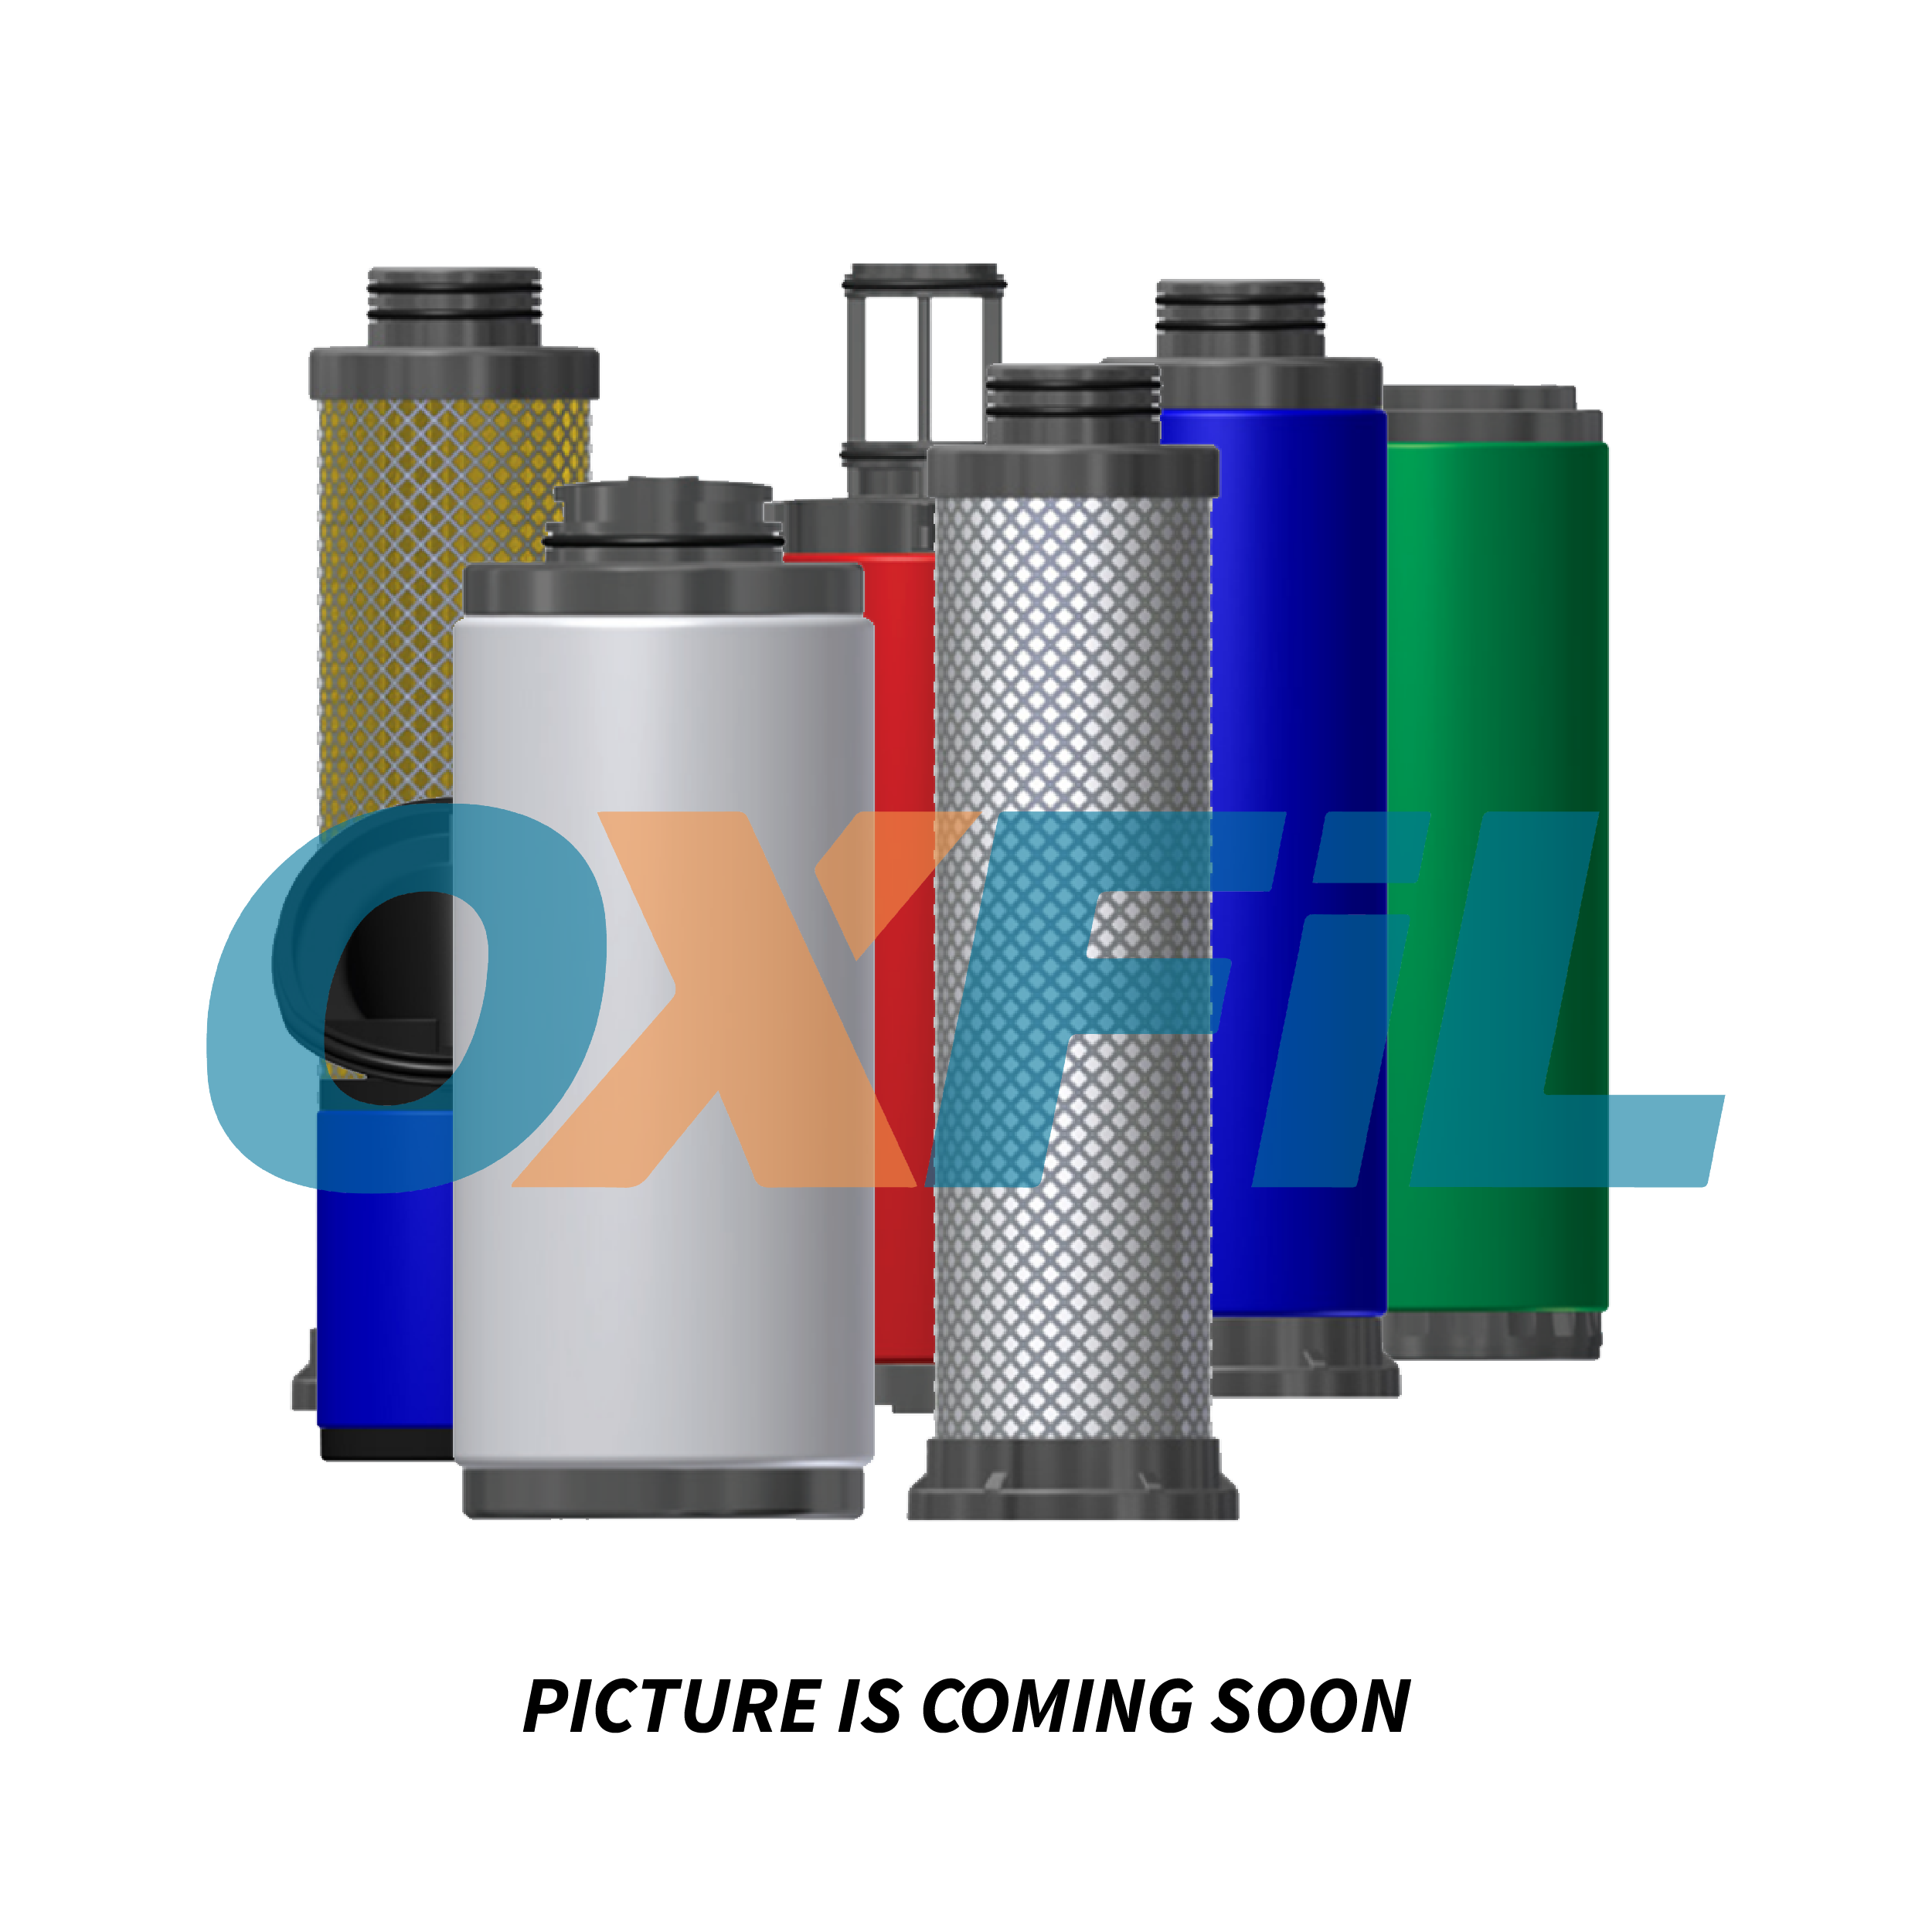 Related product IF.4504 - In-line Filter